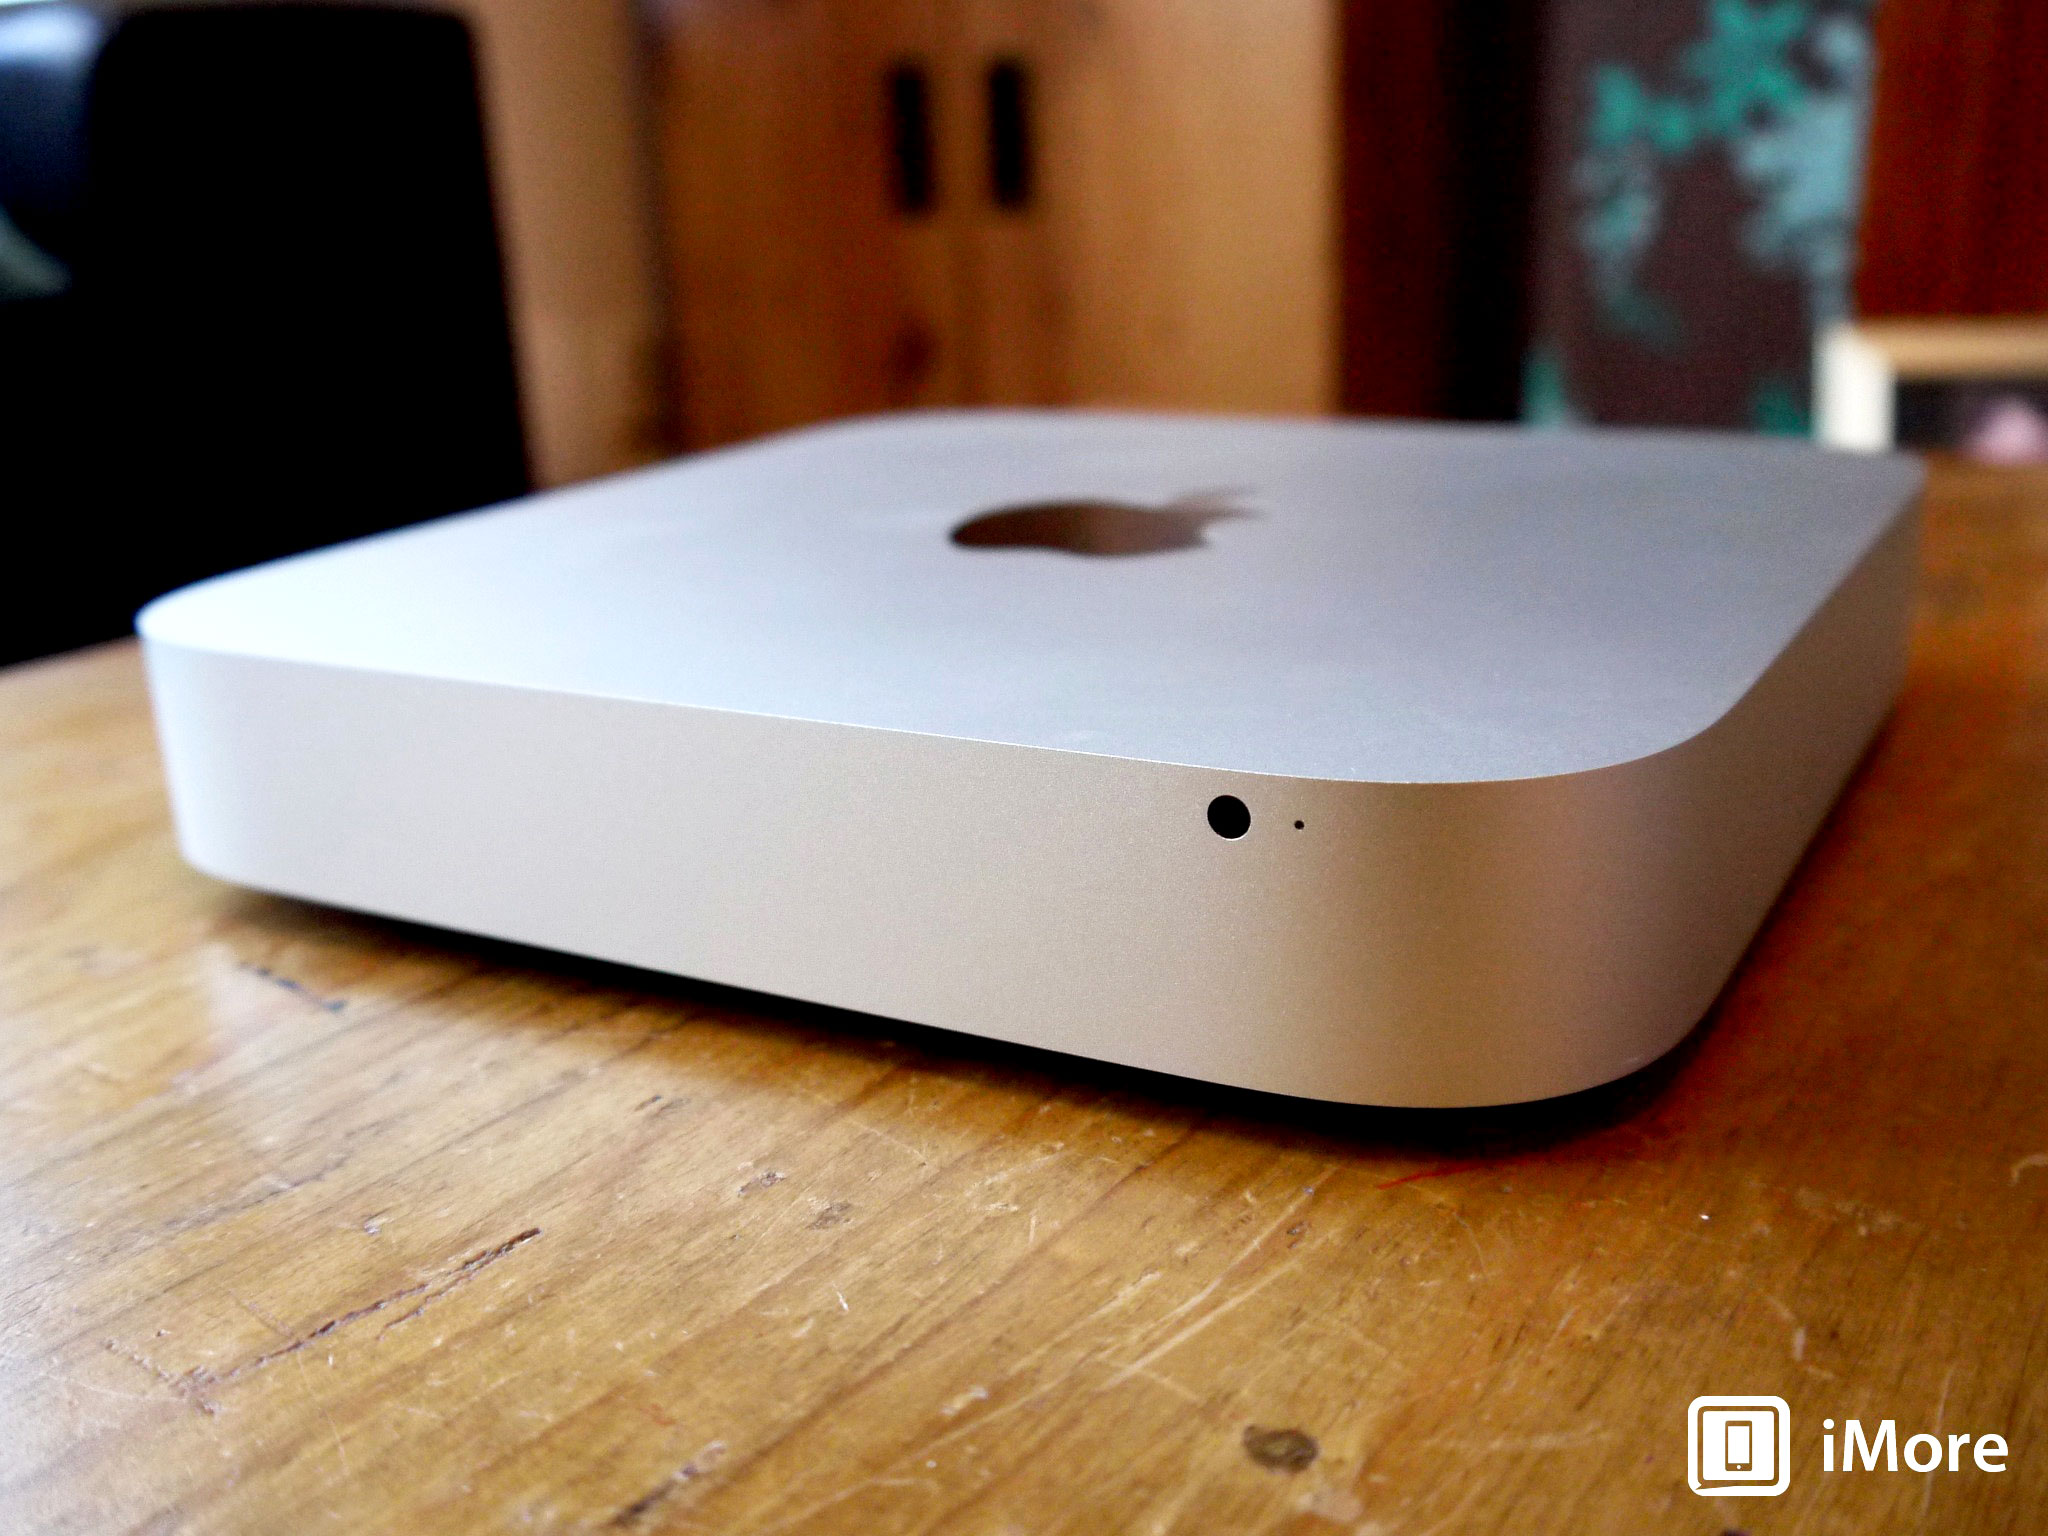 Imagining a new Mac mini - what do you want to see?